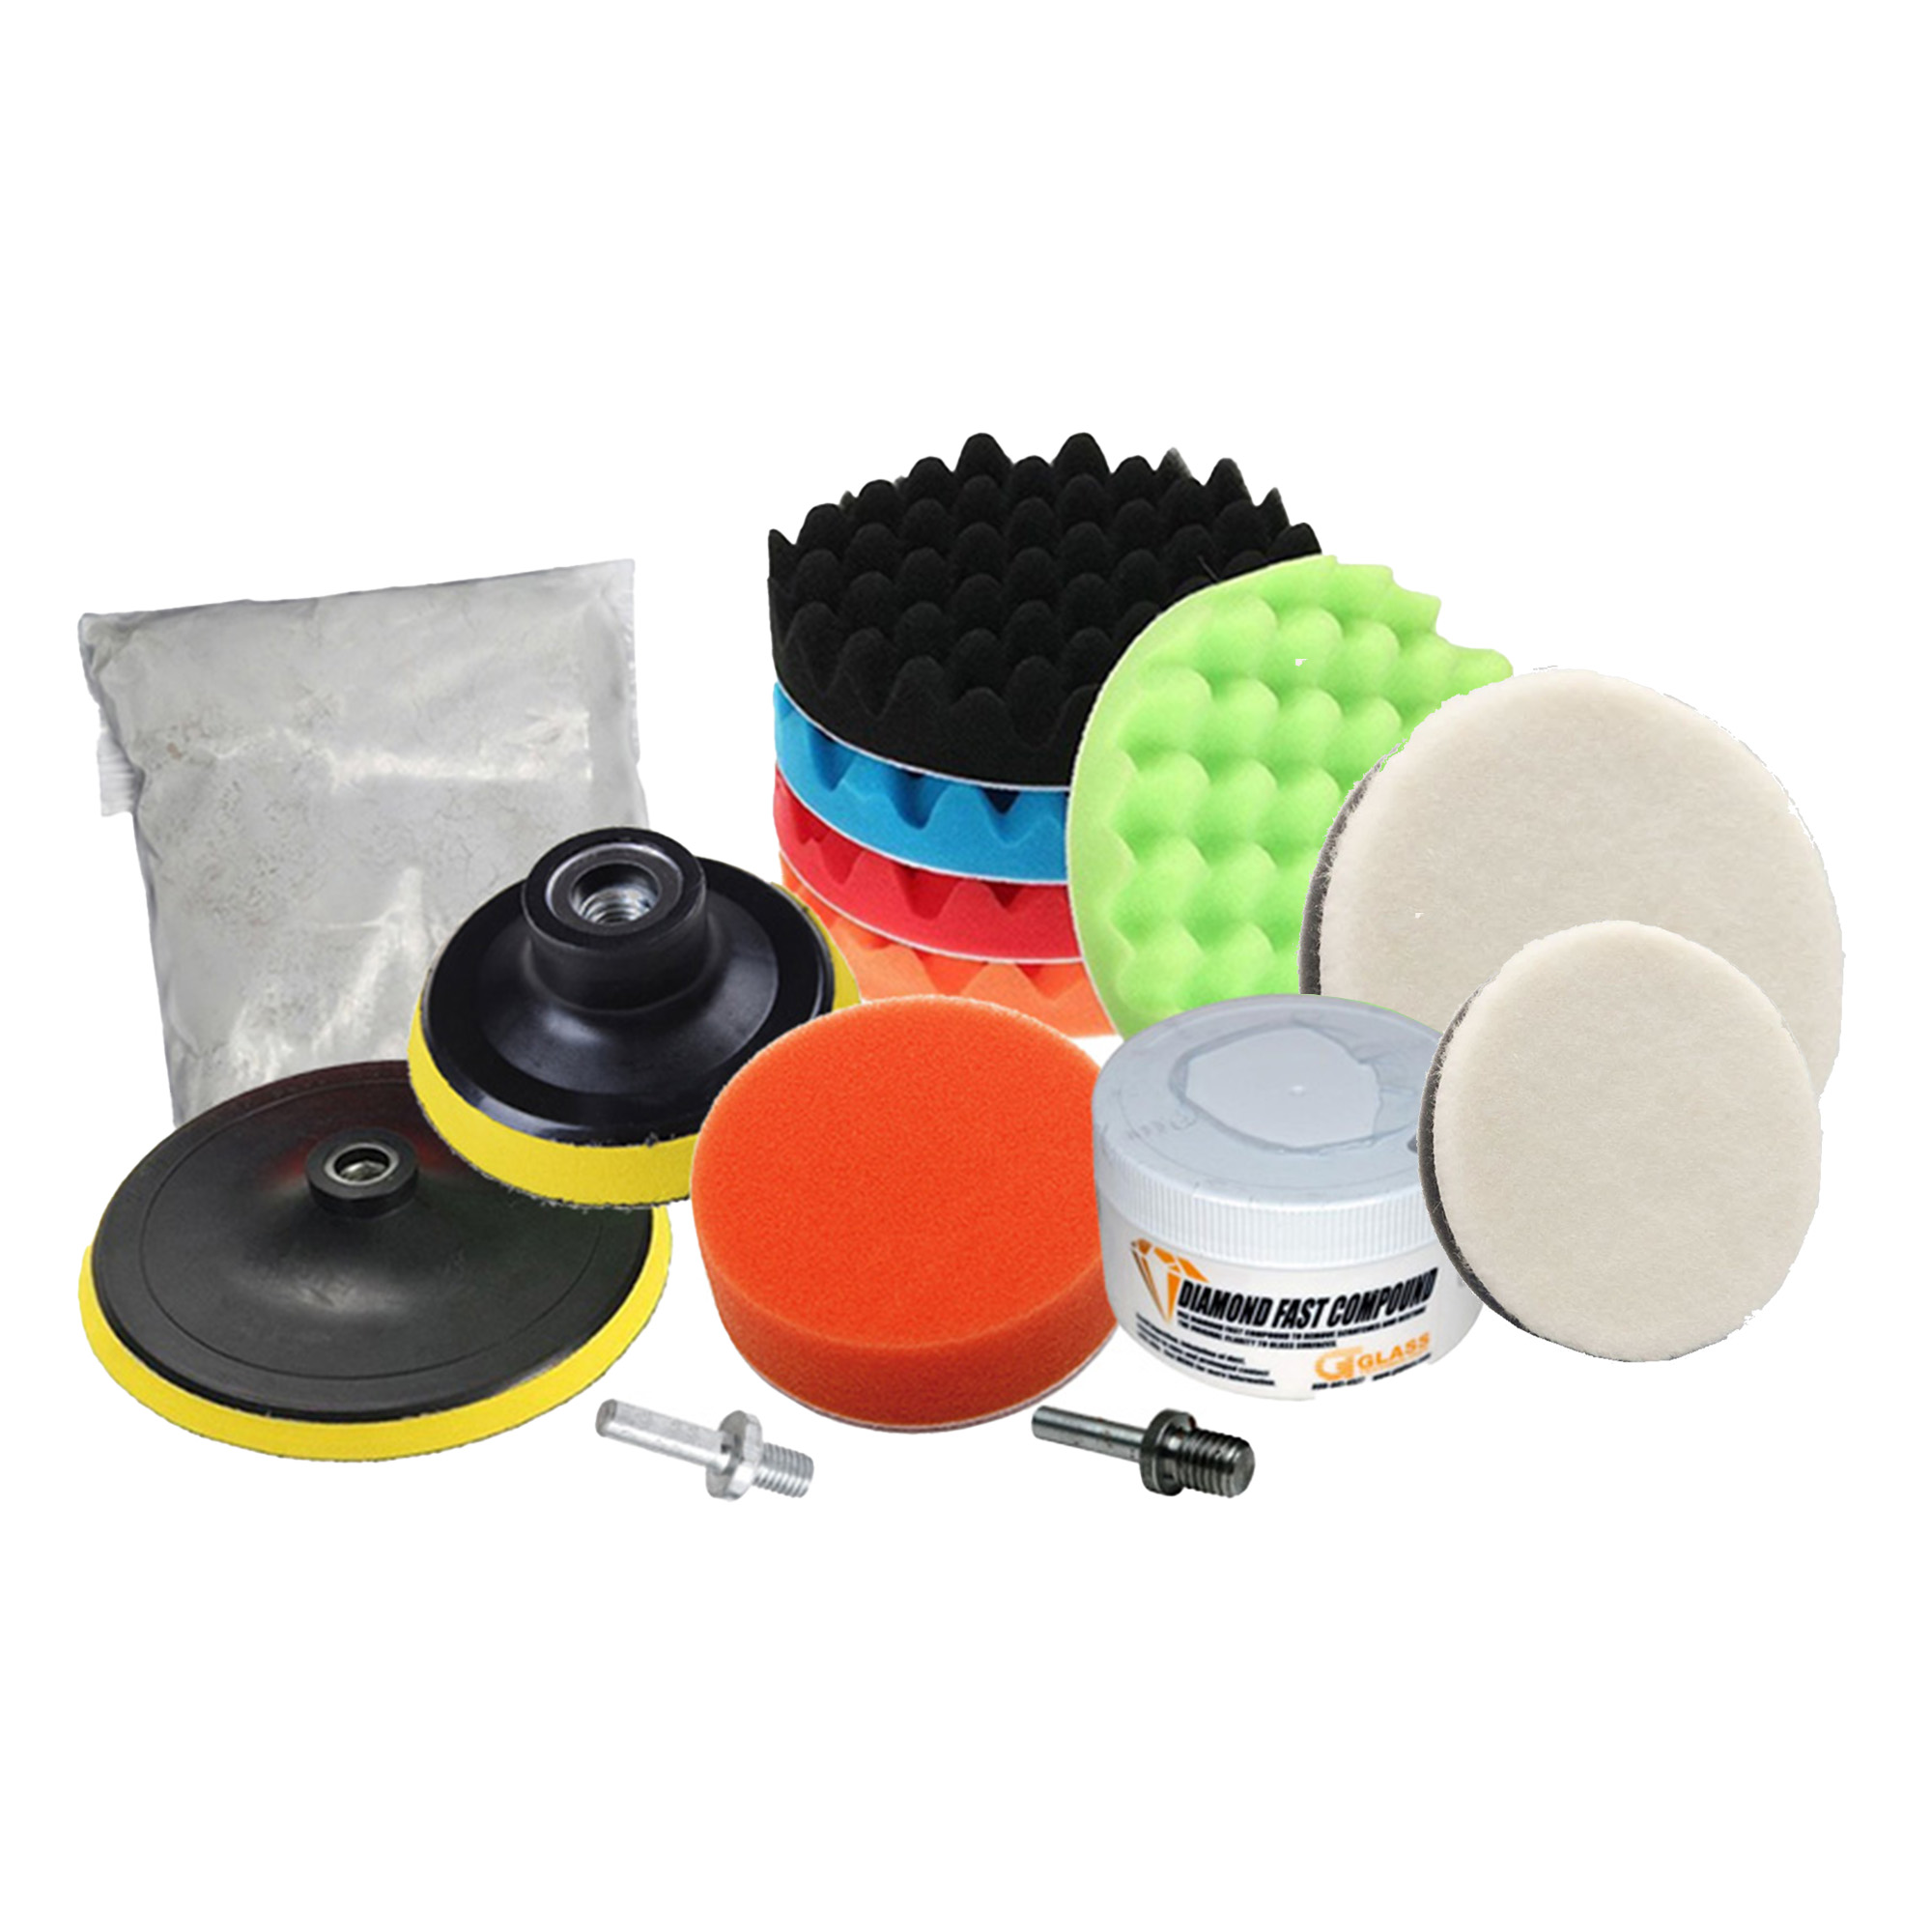 Polishing Kit, for glass, paint, granite remove stains and light scratches  (76-00): Pad Holders - Round